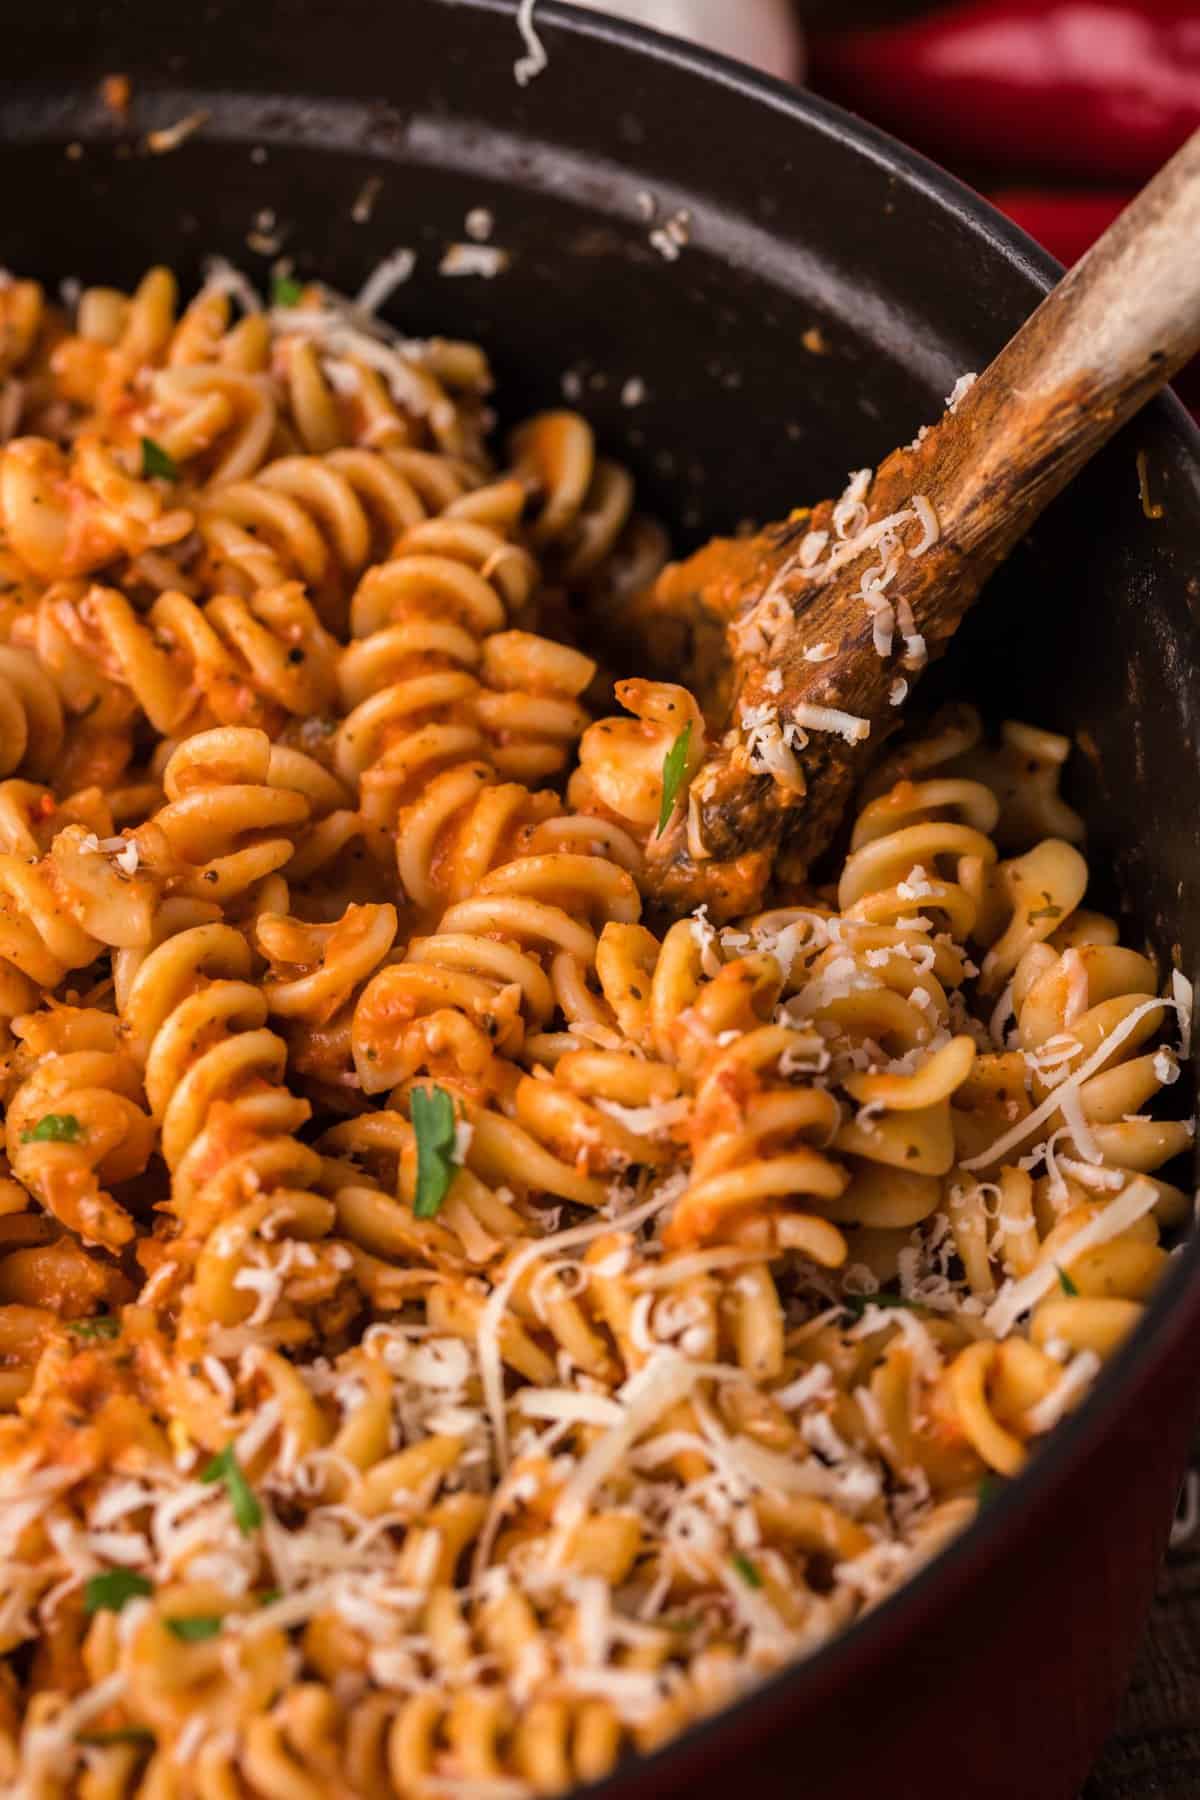 Side shot of the pot of spicy fusilli pasta with wooden spoon.